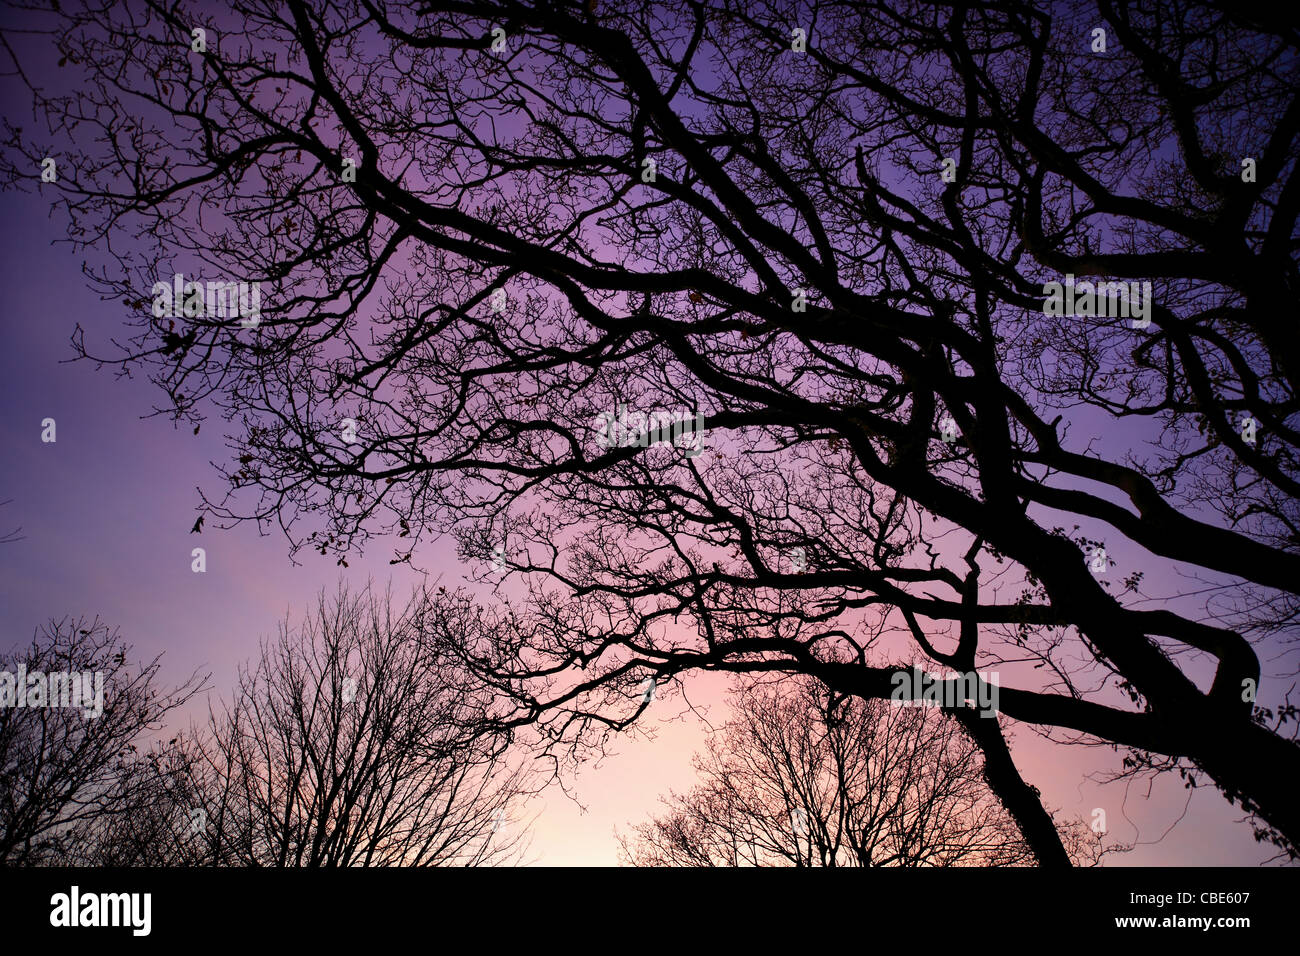 Winter trees silhouetted against an evening sky. Stock Photo